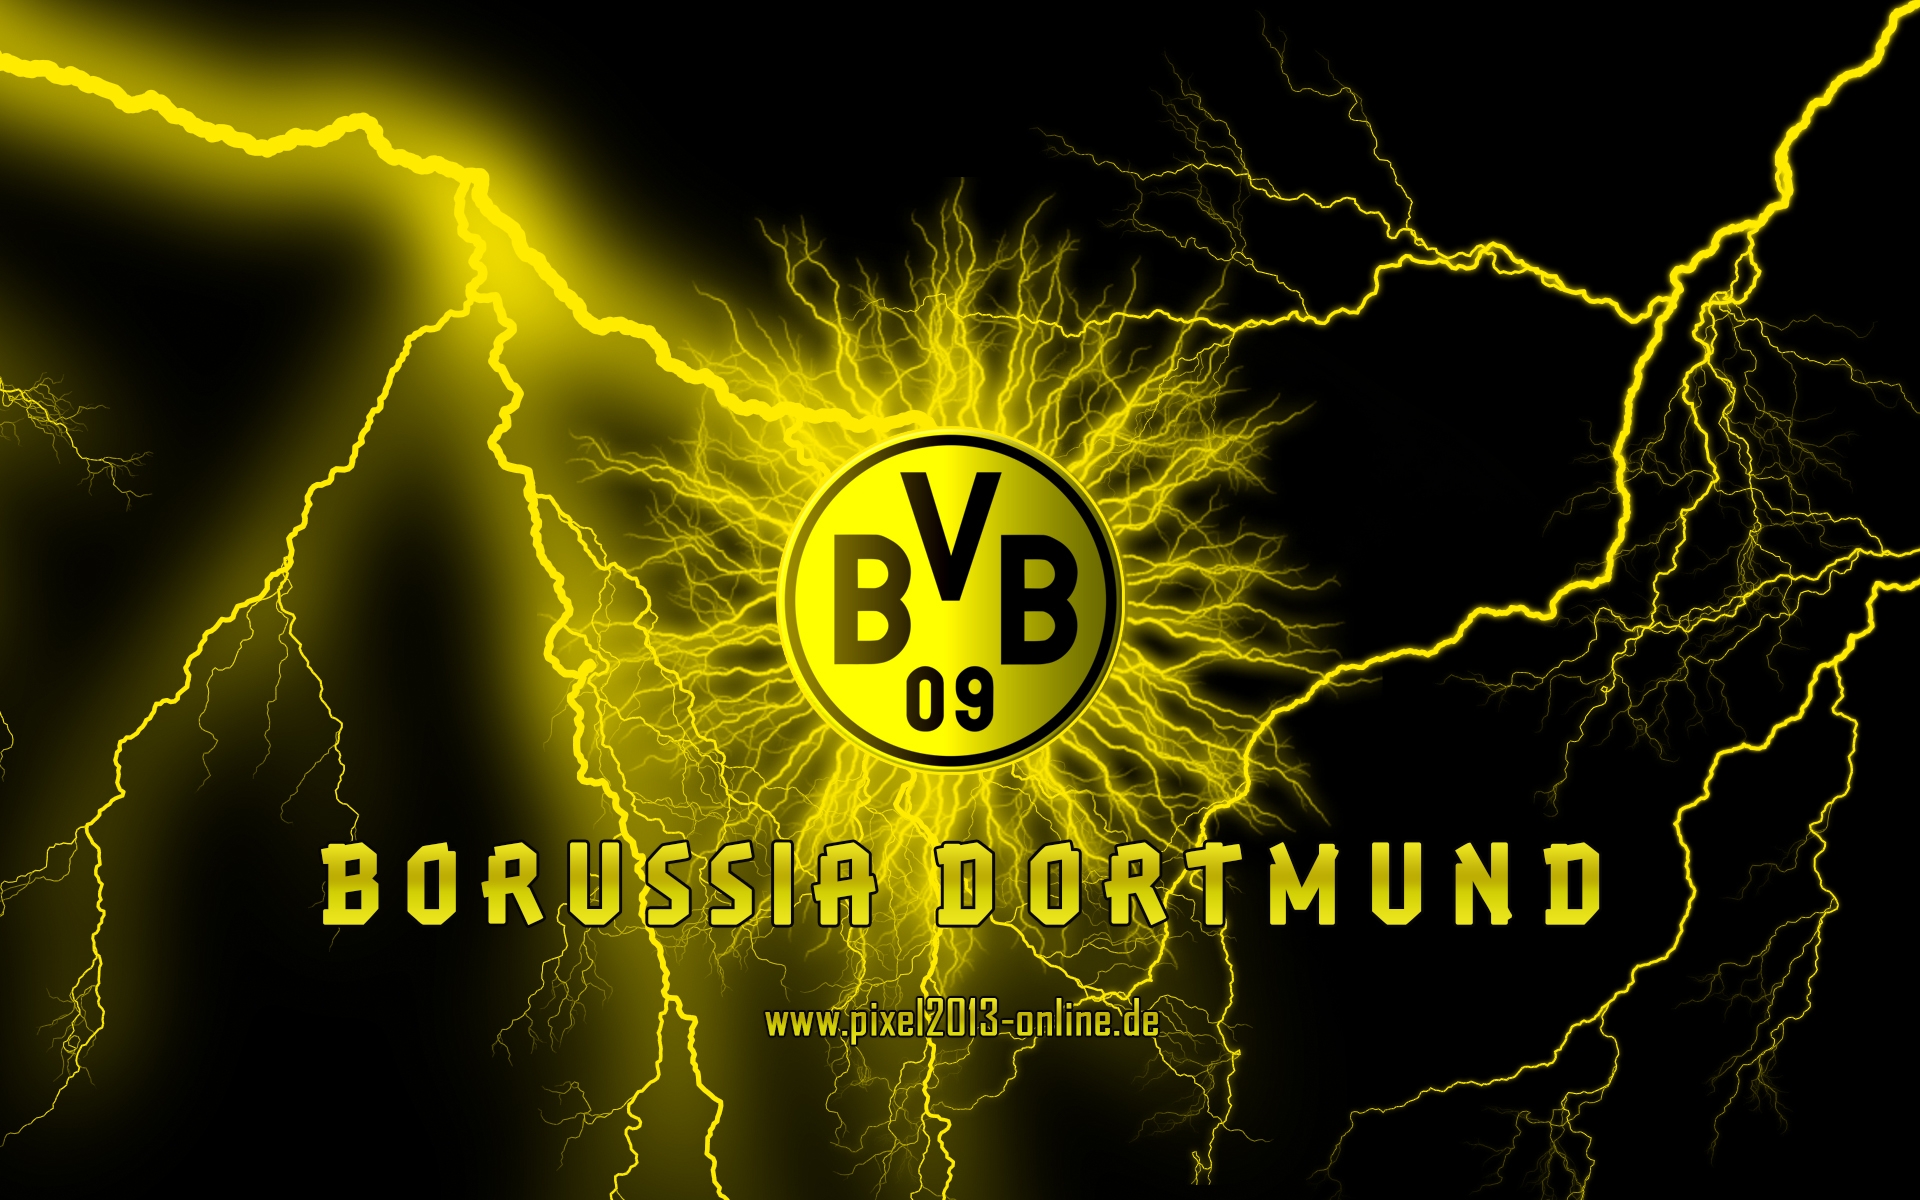 Free Download Ideas About Dortmund Wallpaper On 19x10 For Your Desktop Mobile Tablet Explore 99 Borussia Dortmund Wallpapers Dortmund City Wallpapers Mario Gotze Borussia Dortmund Wallpapers Borussia Monchengladbach Wallpapers